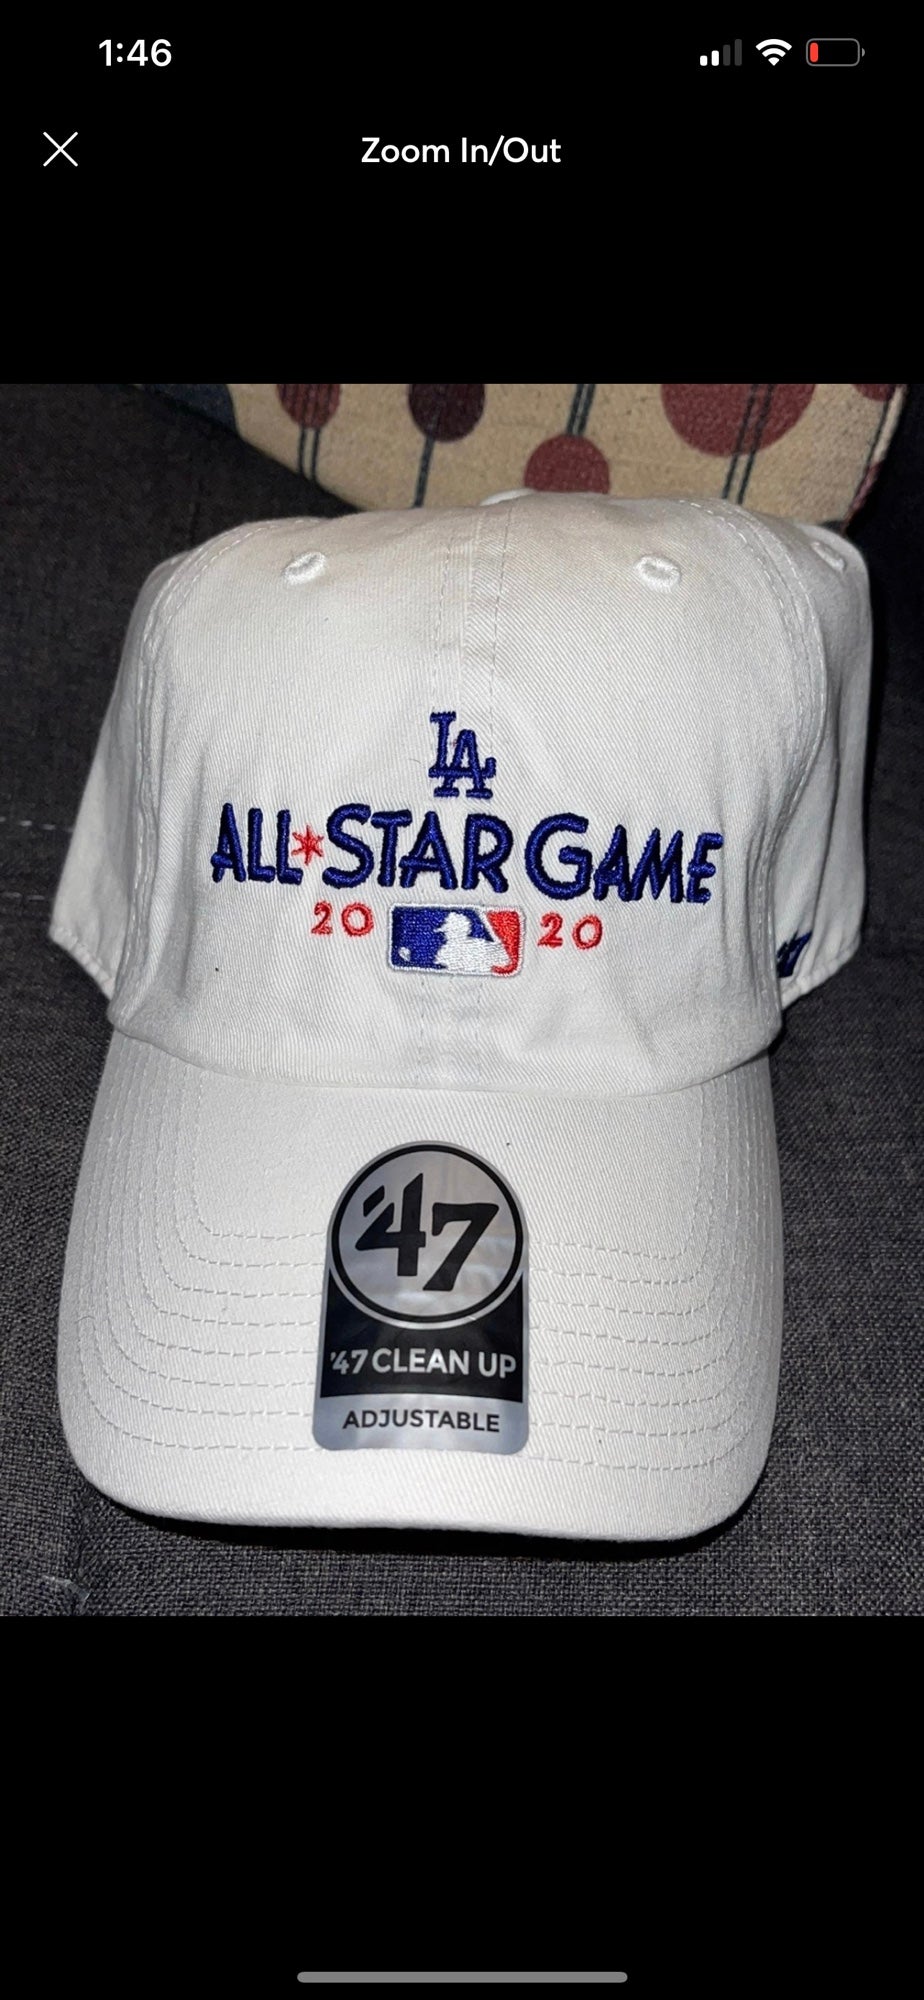 Los Angeles Dodgers All-Star Game MLB Jerseys for sale